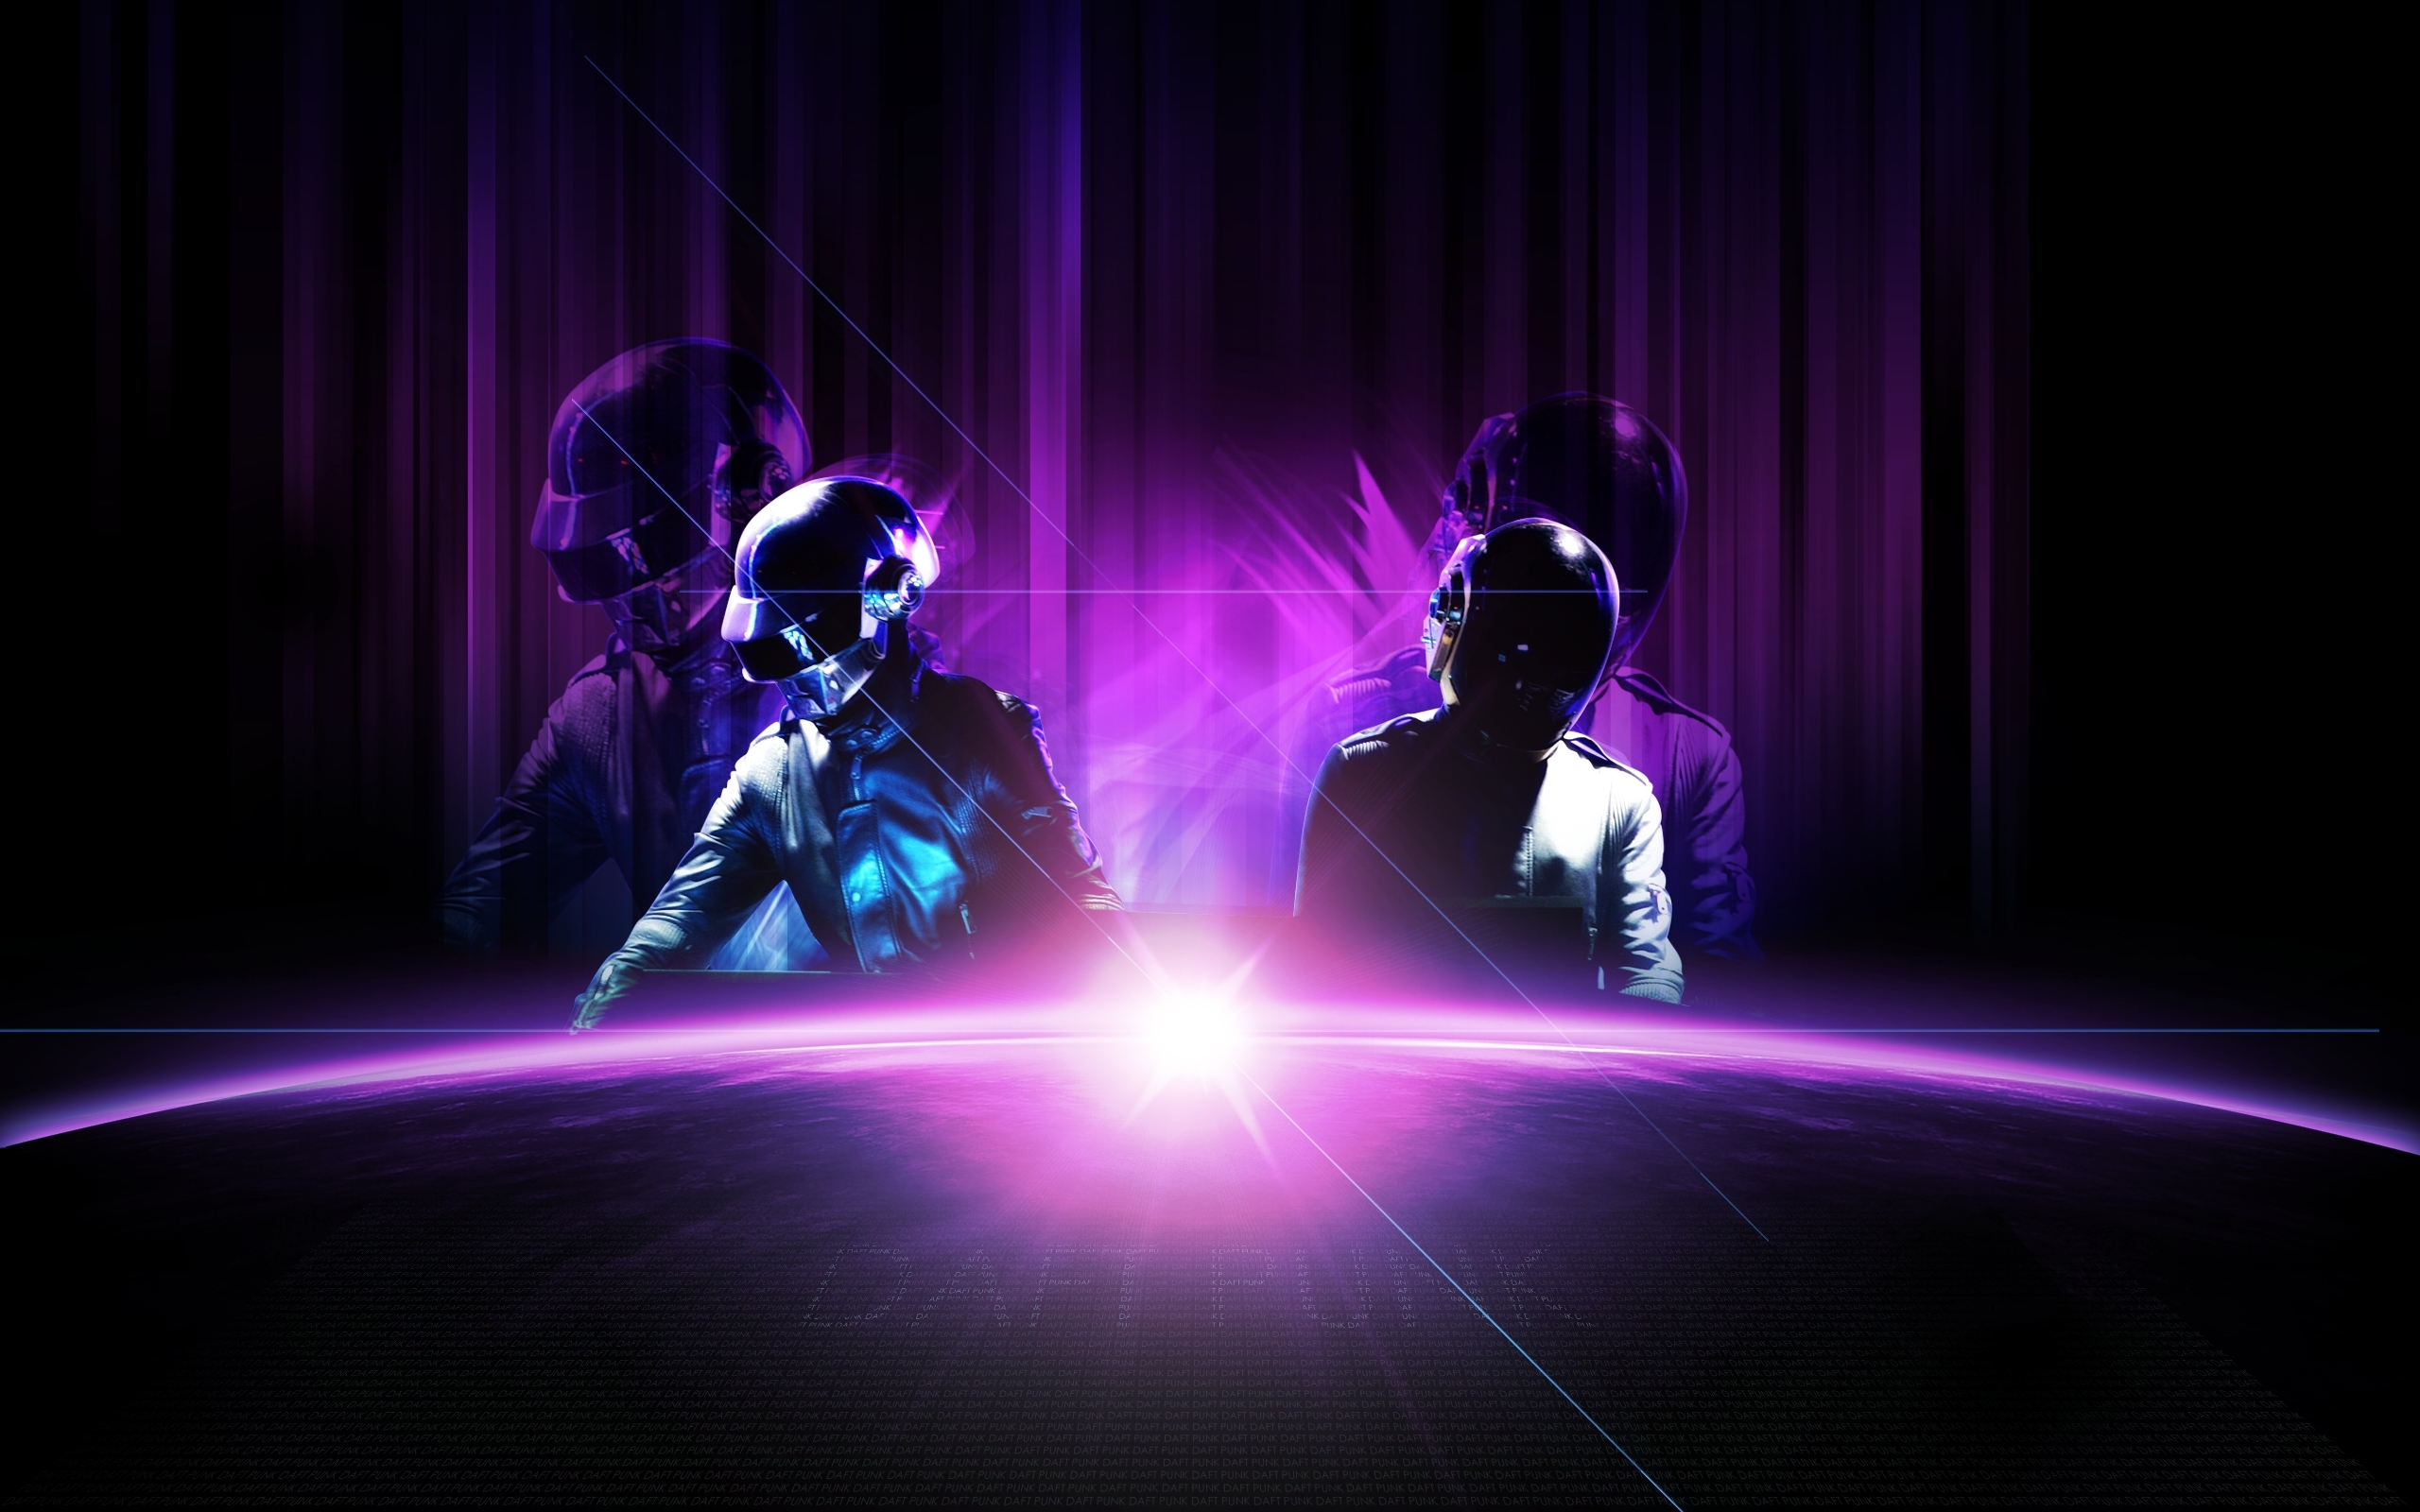 210+ Daft Punk HD Wallpapers and Backgrounds